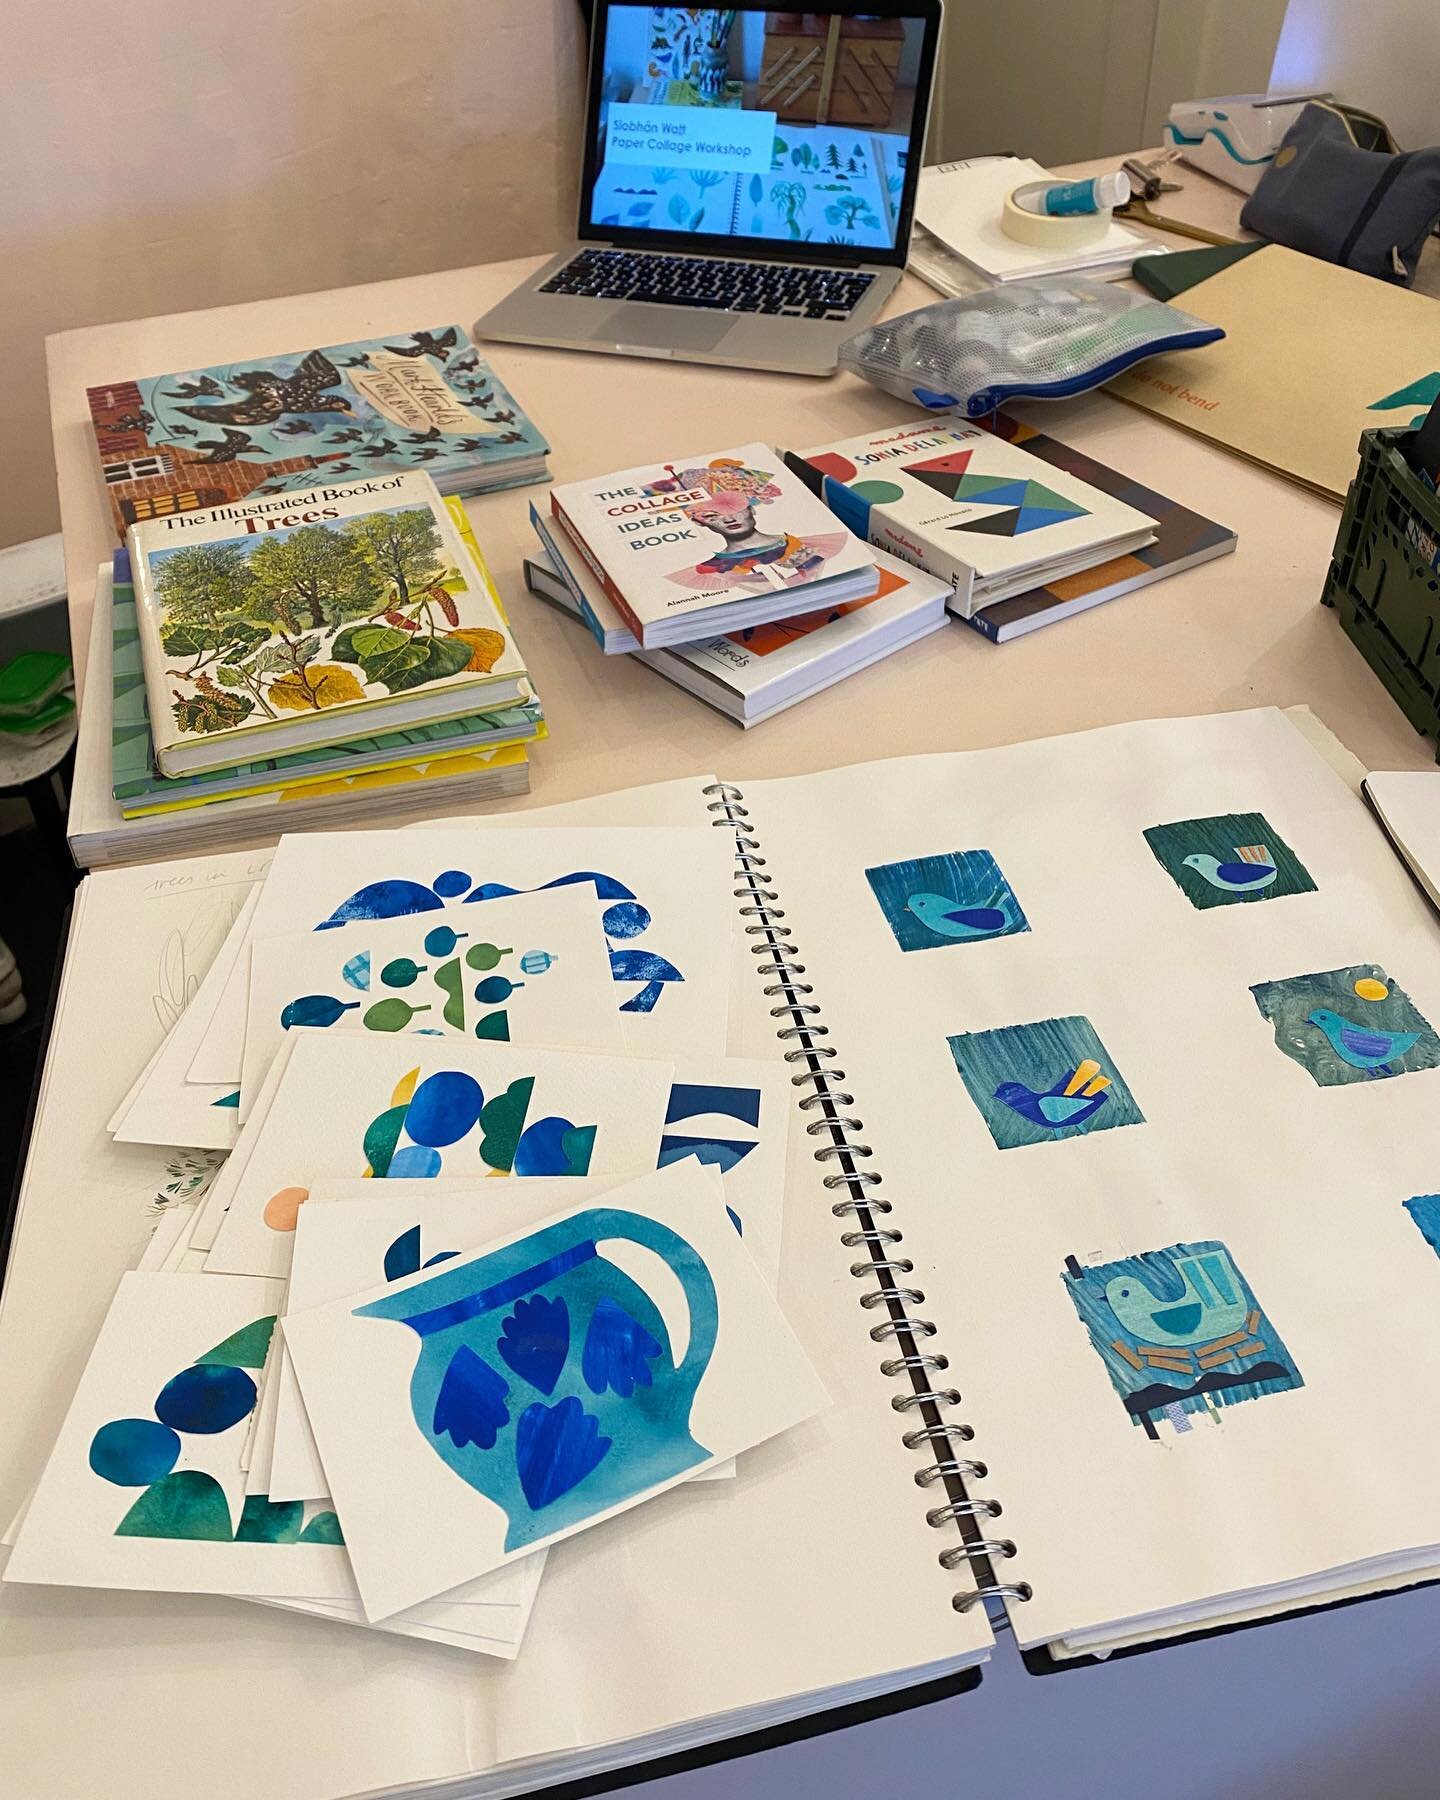 Sharing a few pics from the brilliant collage workshop I hosted this week @poemelondon 
⠀⠀⠀⠀⠀⠀⠀⠀⠀
It was so much fun to share this technique with a lovely group of people - I really enjoyed seeing what everyone created😍 
⠀⠀⠀⠀⠀⠀⠀⠀⠀
Big thank you for 